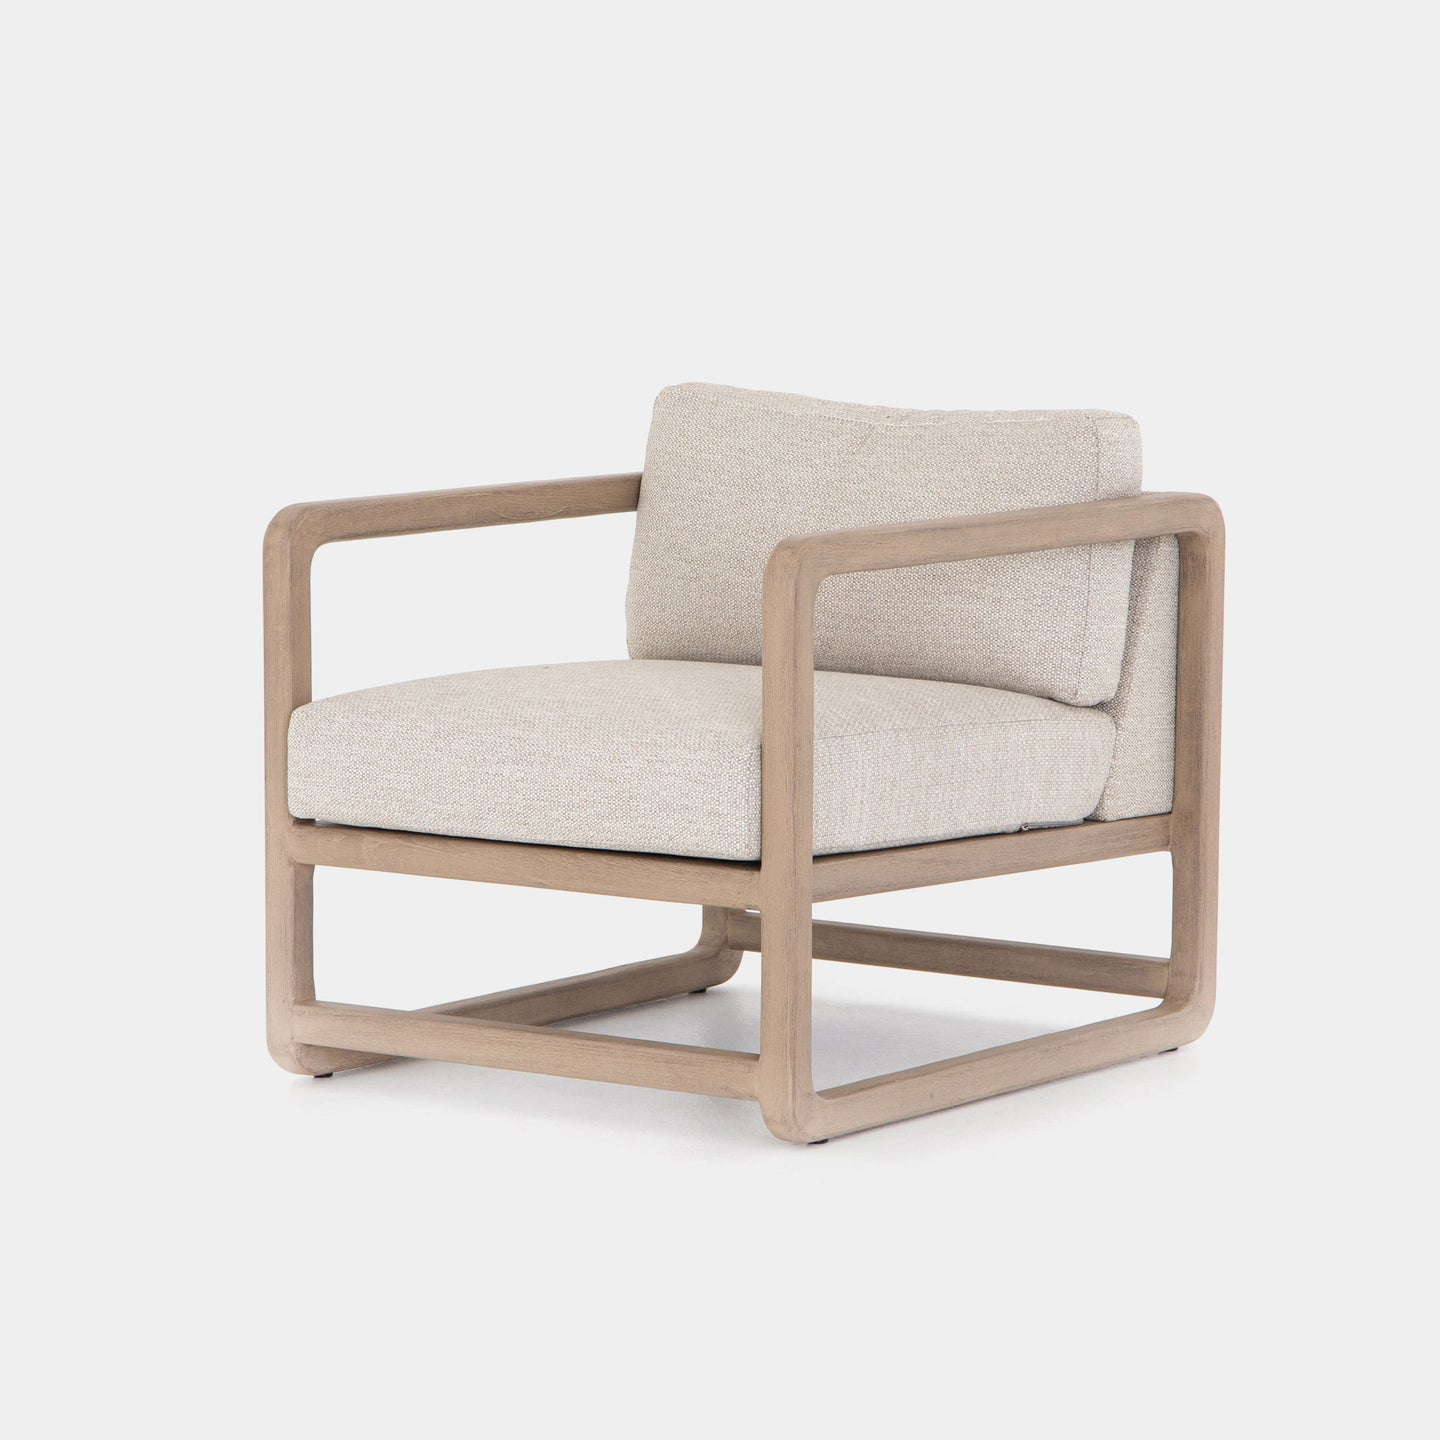 Mantell Teak Outdoor Chair In Faye Sand